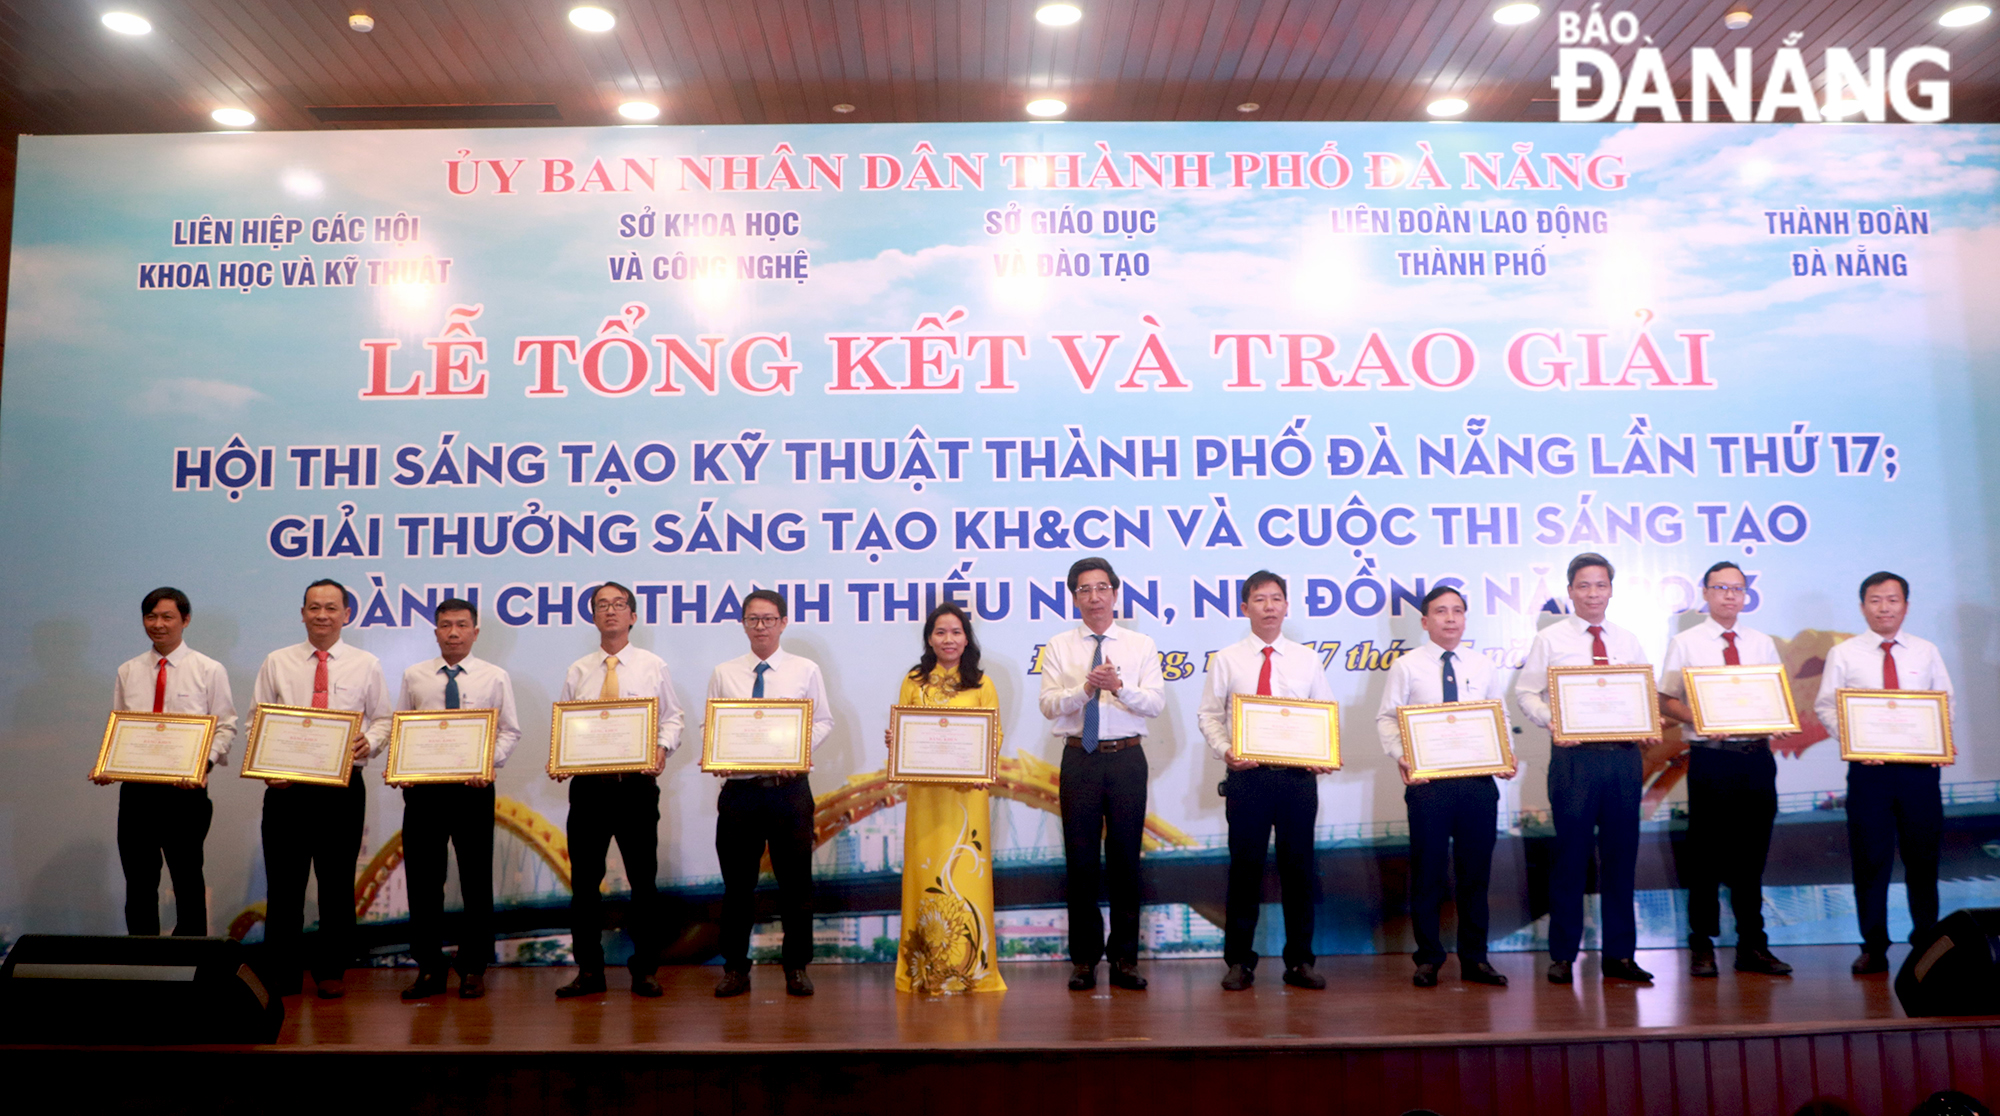 Vice Chairman of the Da Nang People's Committee Tran Chi Cuong awarding Certificates of Merit to the winning authors and groups of authors.